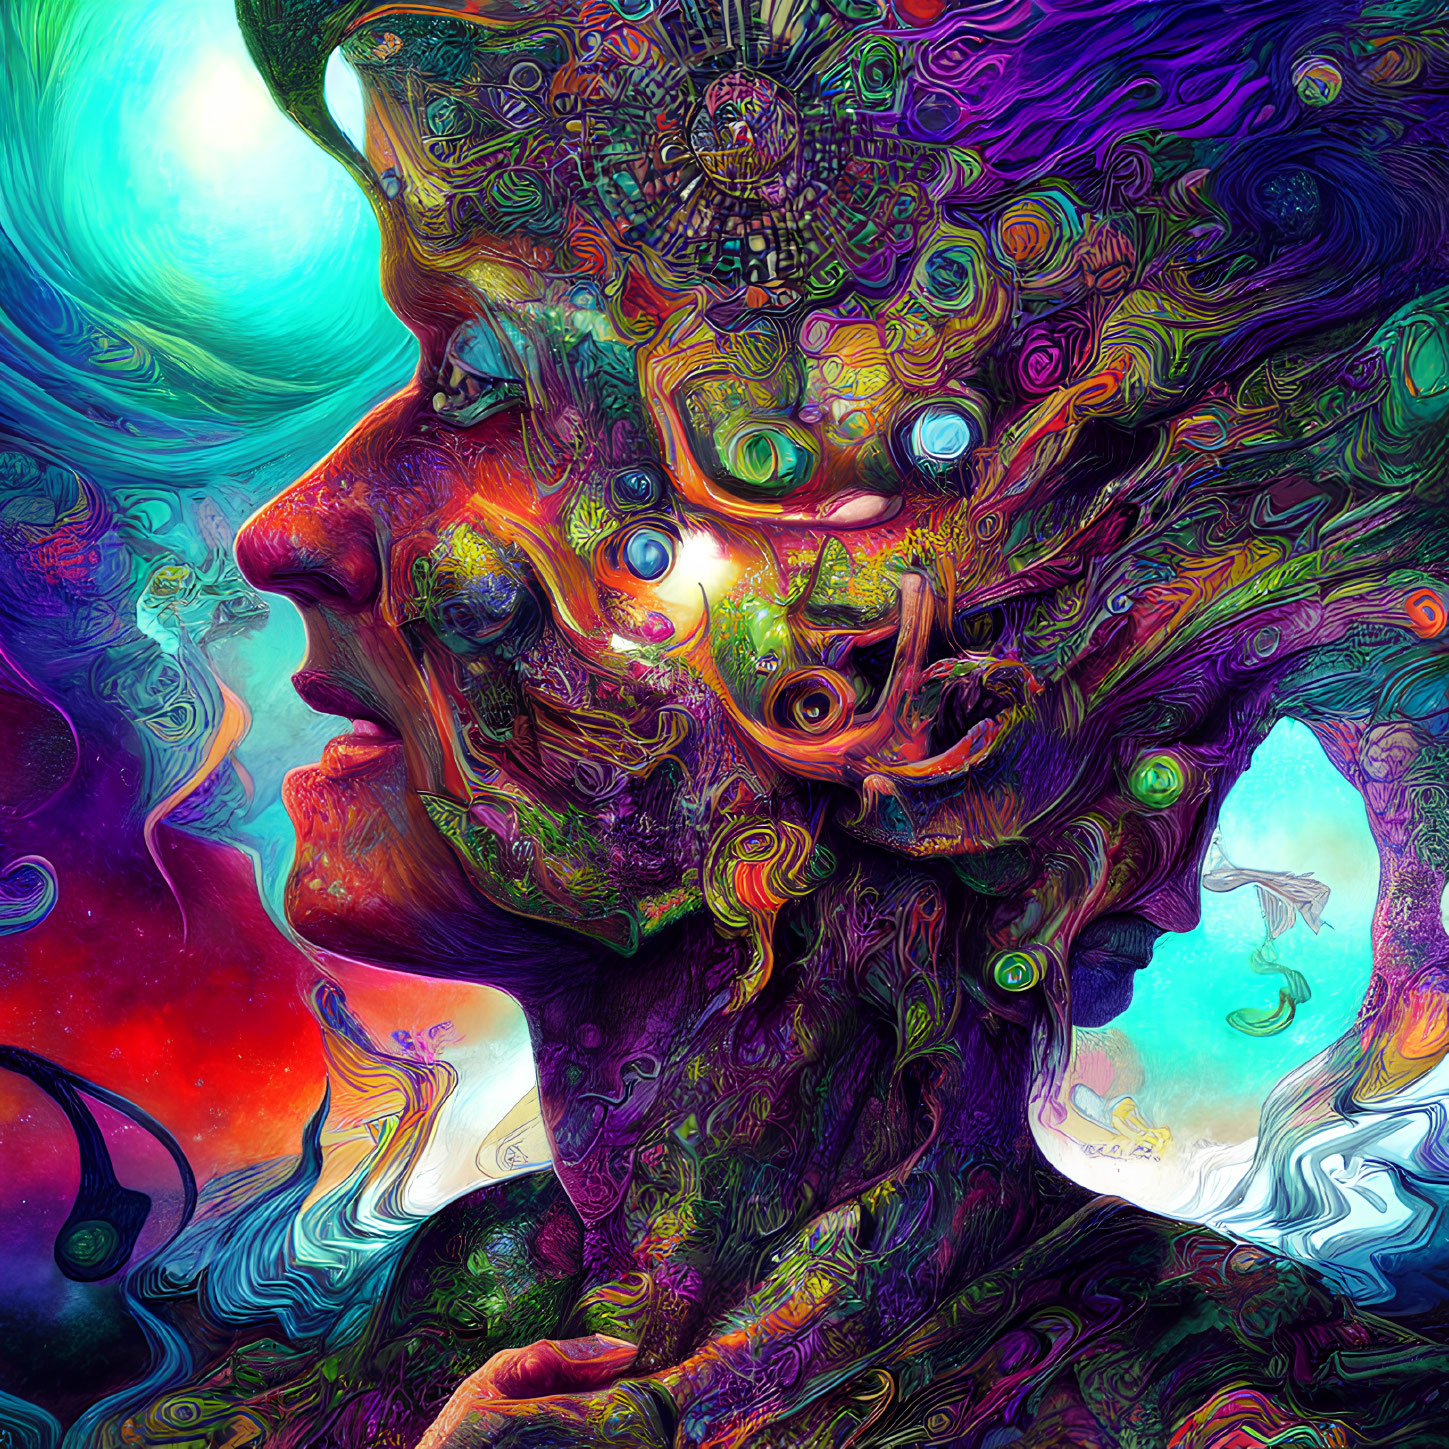 Colorful Psychedelic Artwork with Entwined Faces and Abstract Patterns